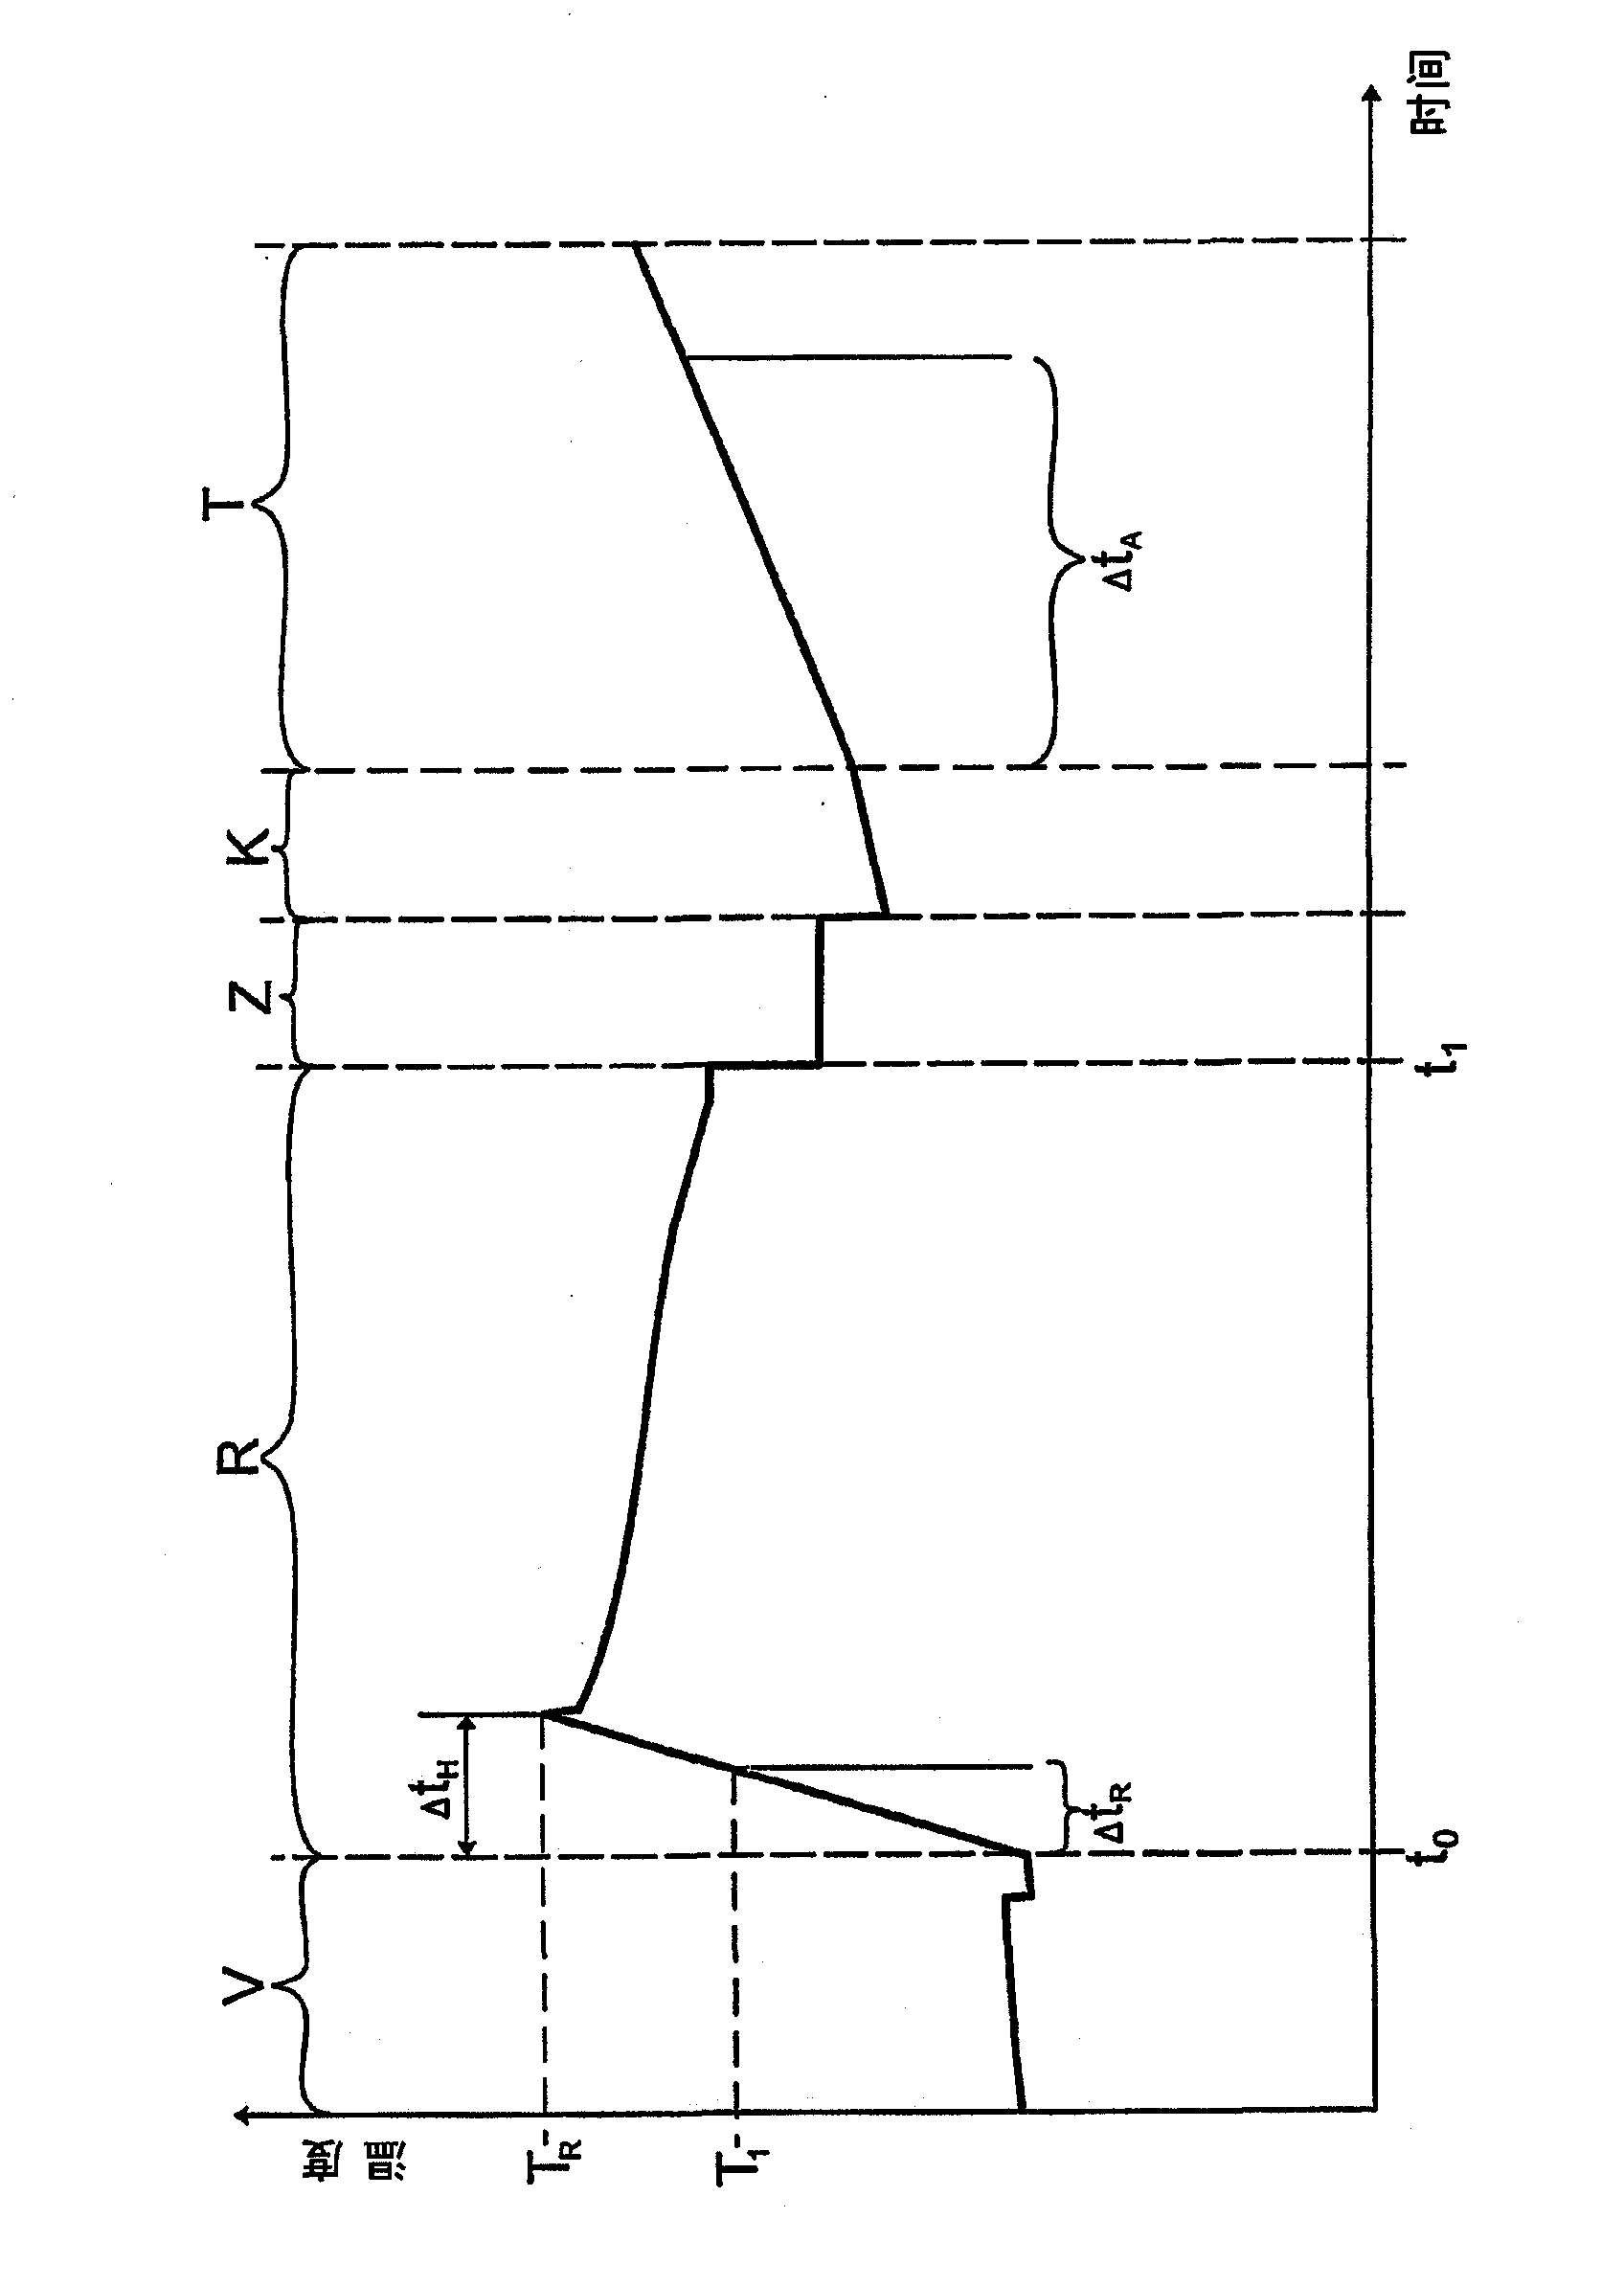 Method for operating a water-carrying household appliance